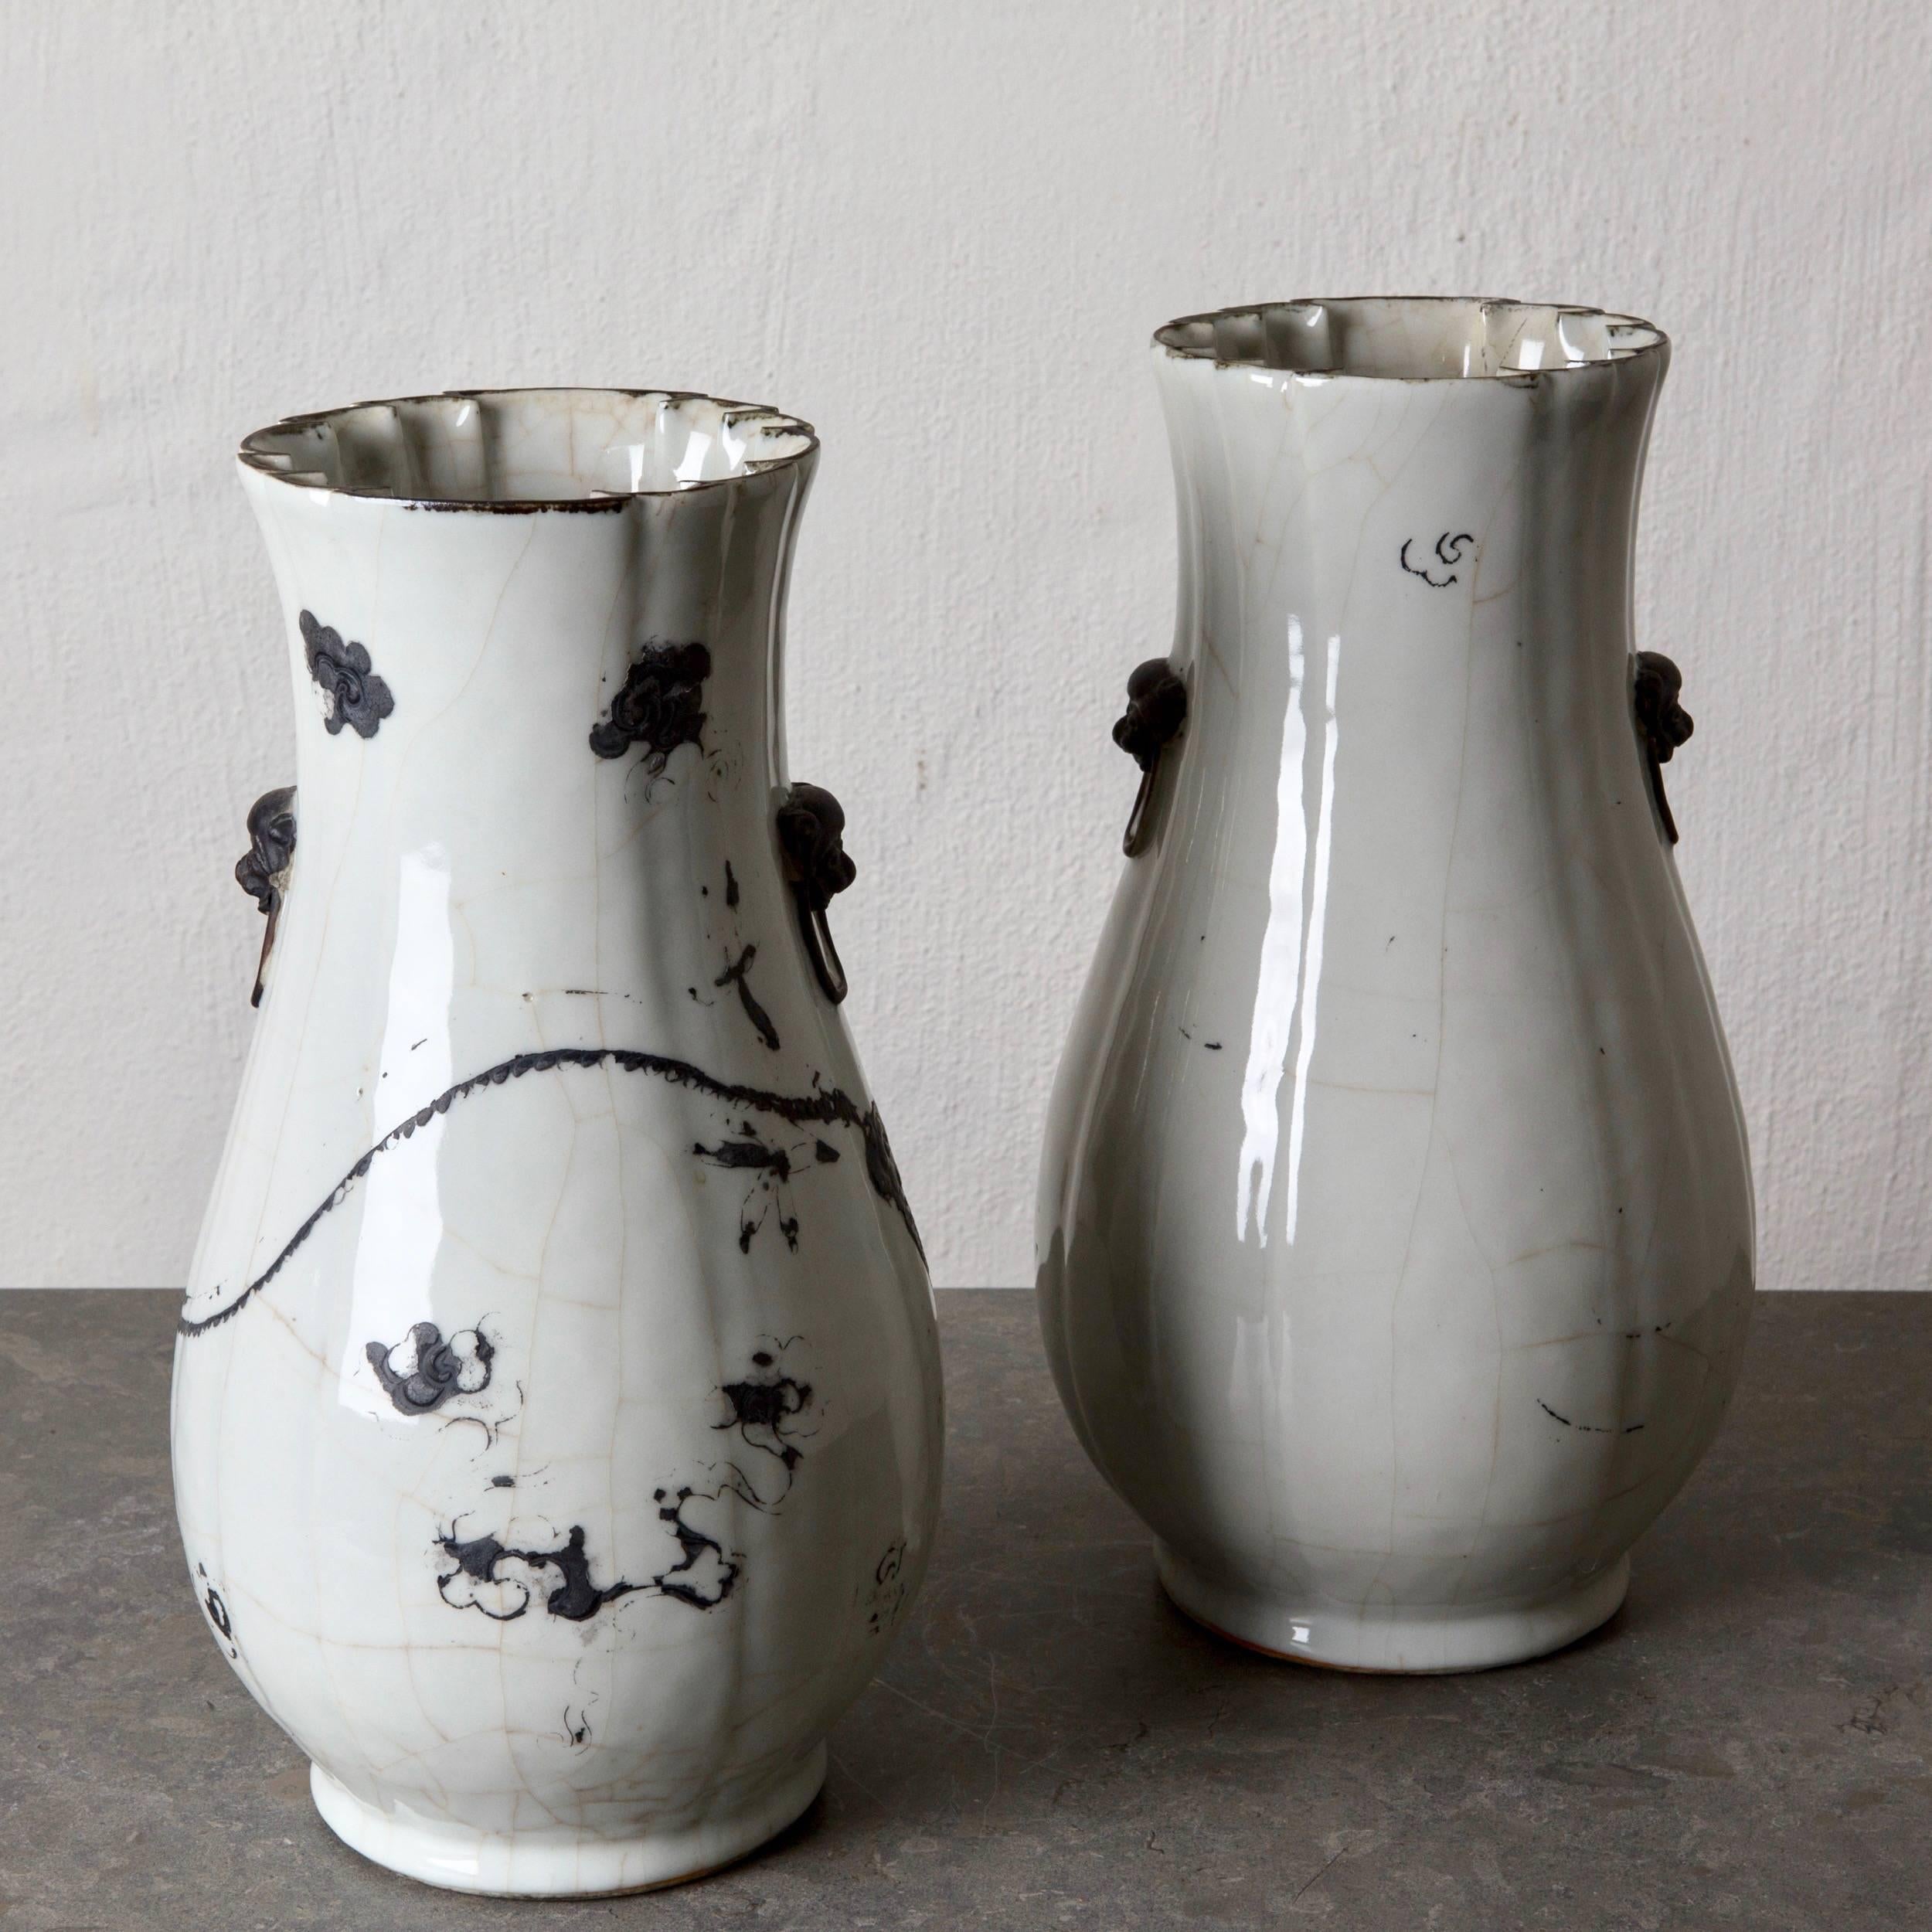 A pair of vases made during the 19th century the in Japan. White background with black details.